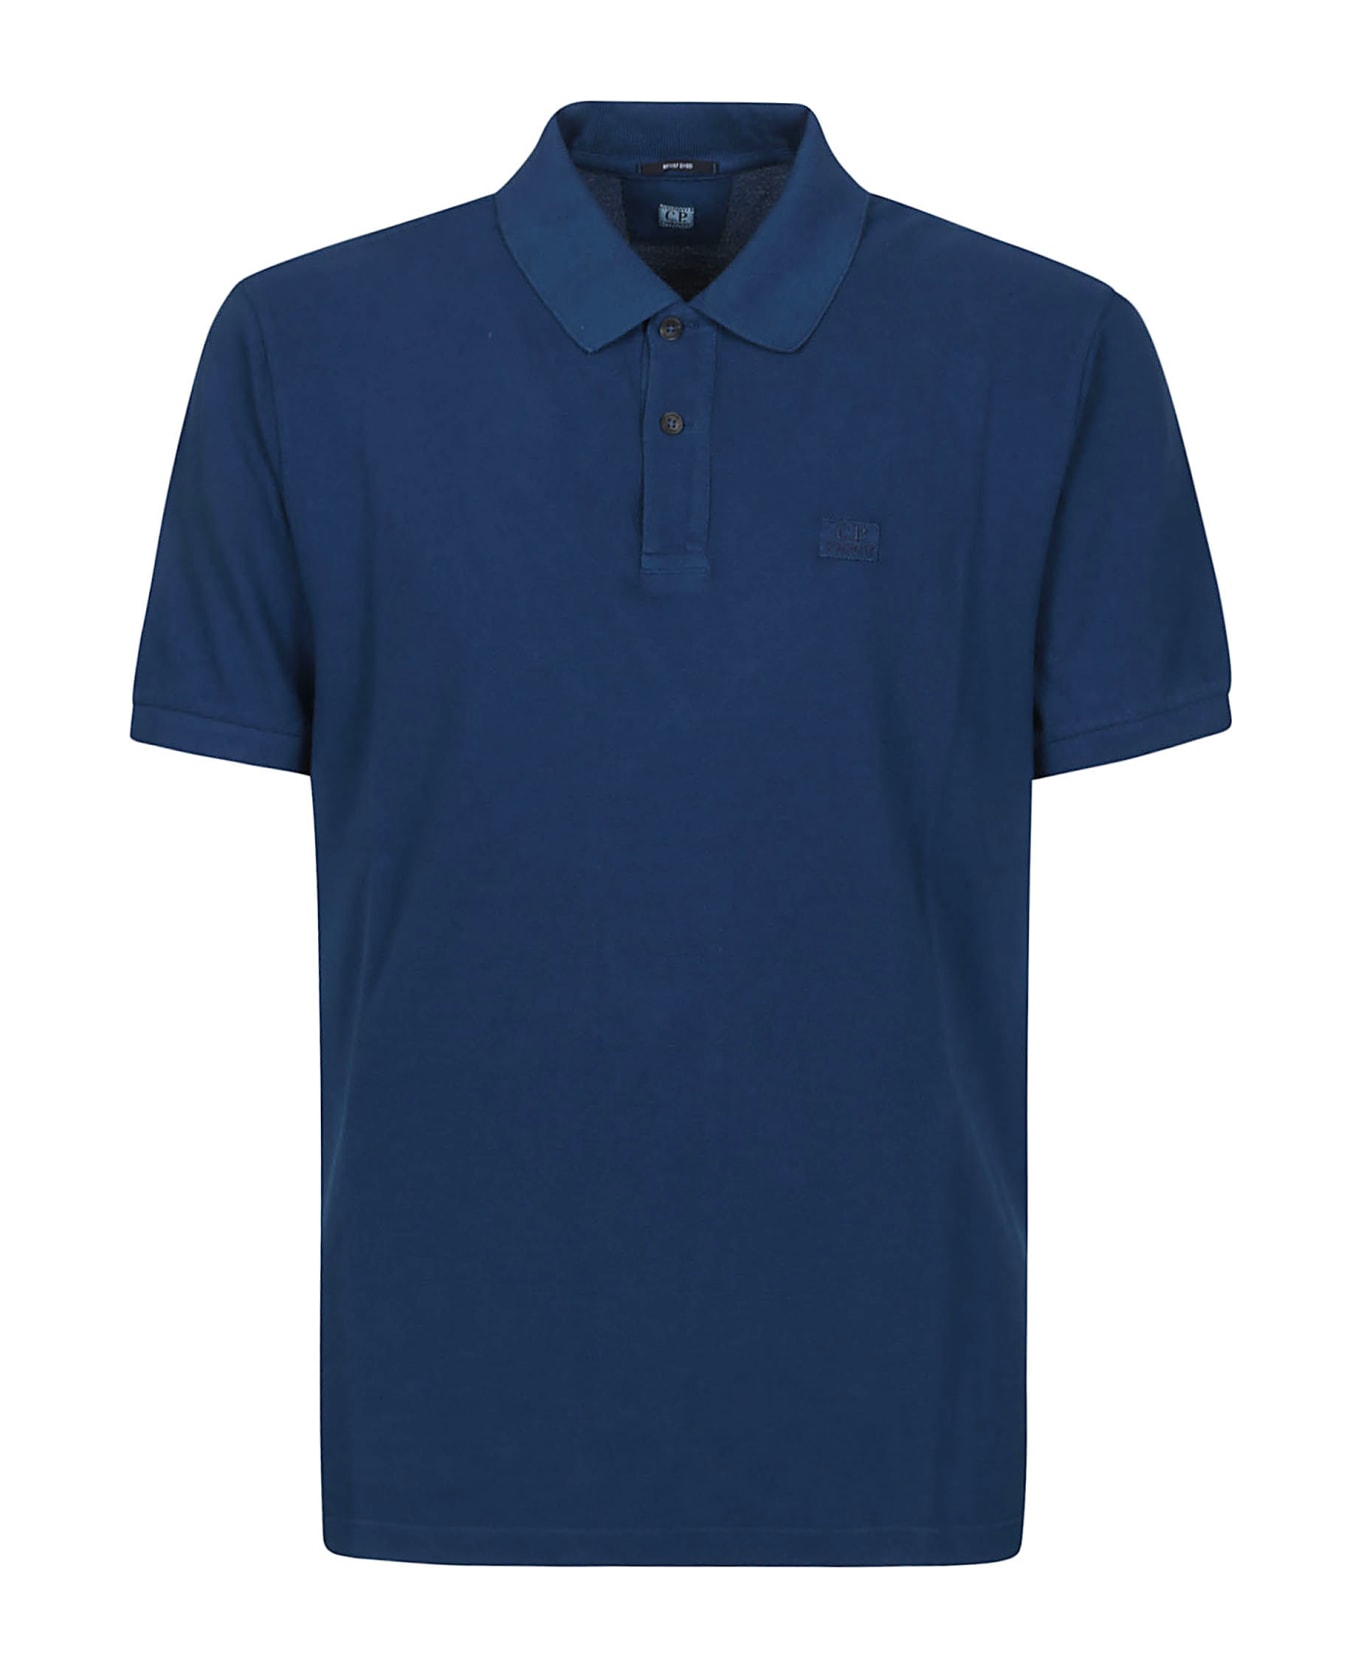 C.P. Company 24/1 Piquet Resist Dyed Short Sleeve Polo Shirt - Ink Blue